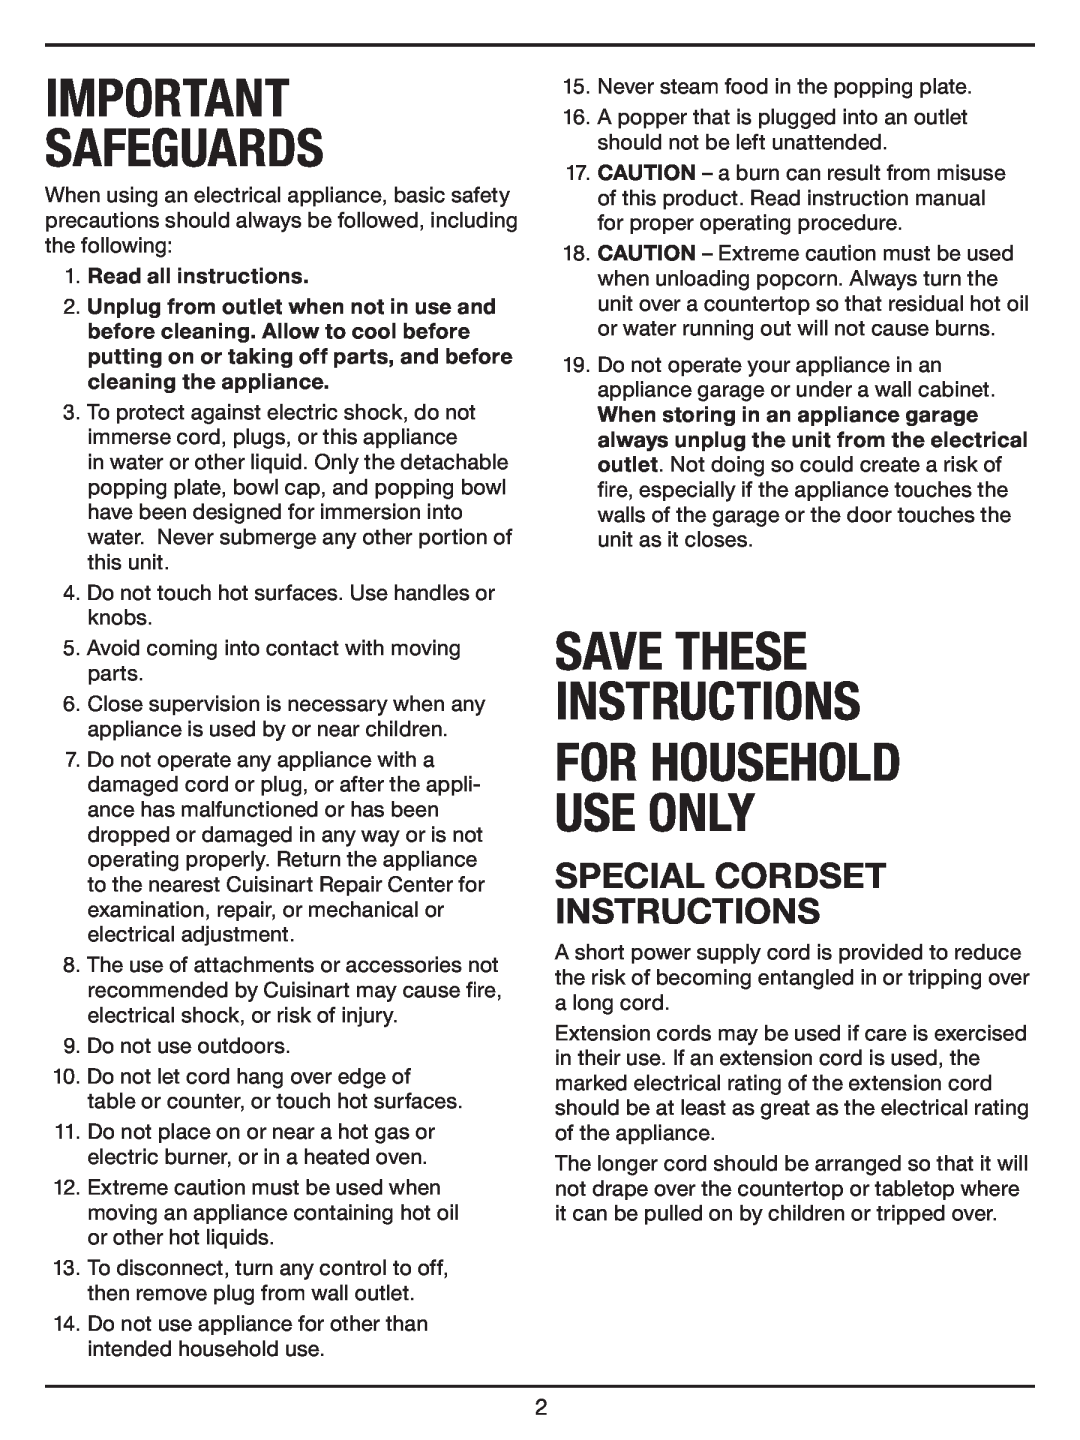 Cuisinart CPM-700 Series manual Safeguards, Save These Instructions For Household Use Only, Special Cordset Instructions 